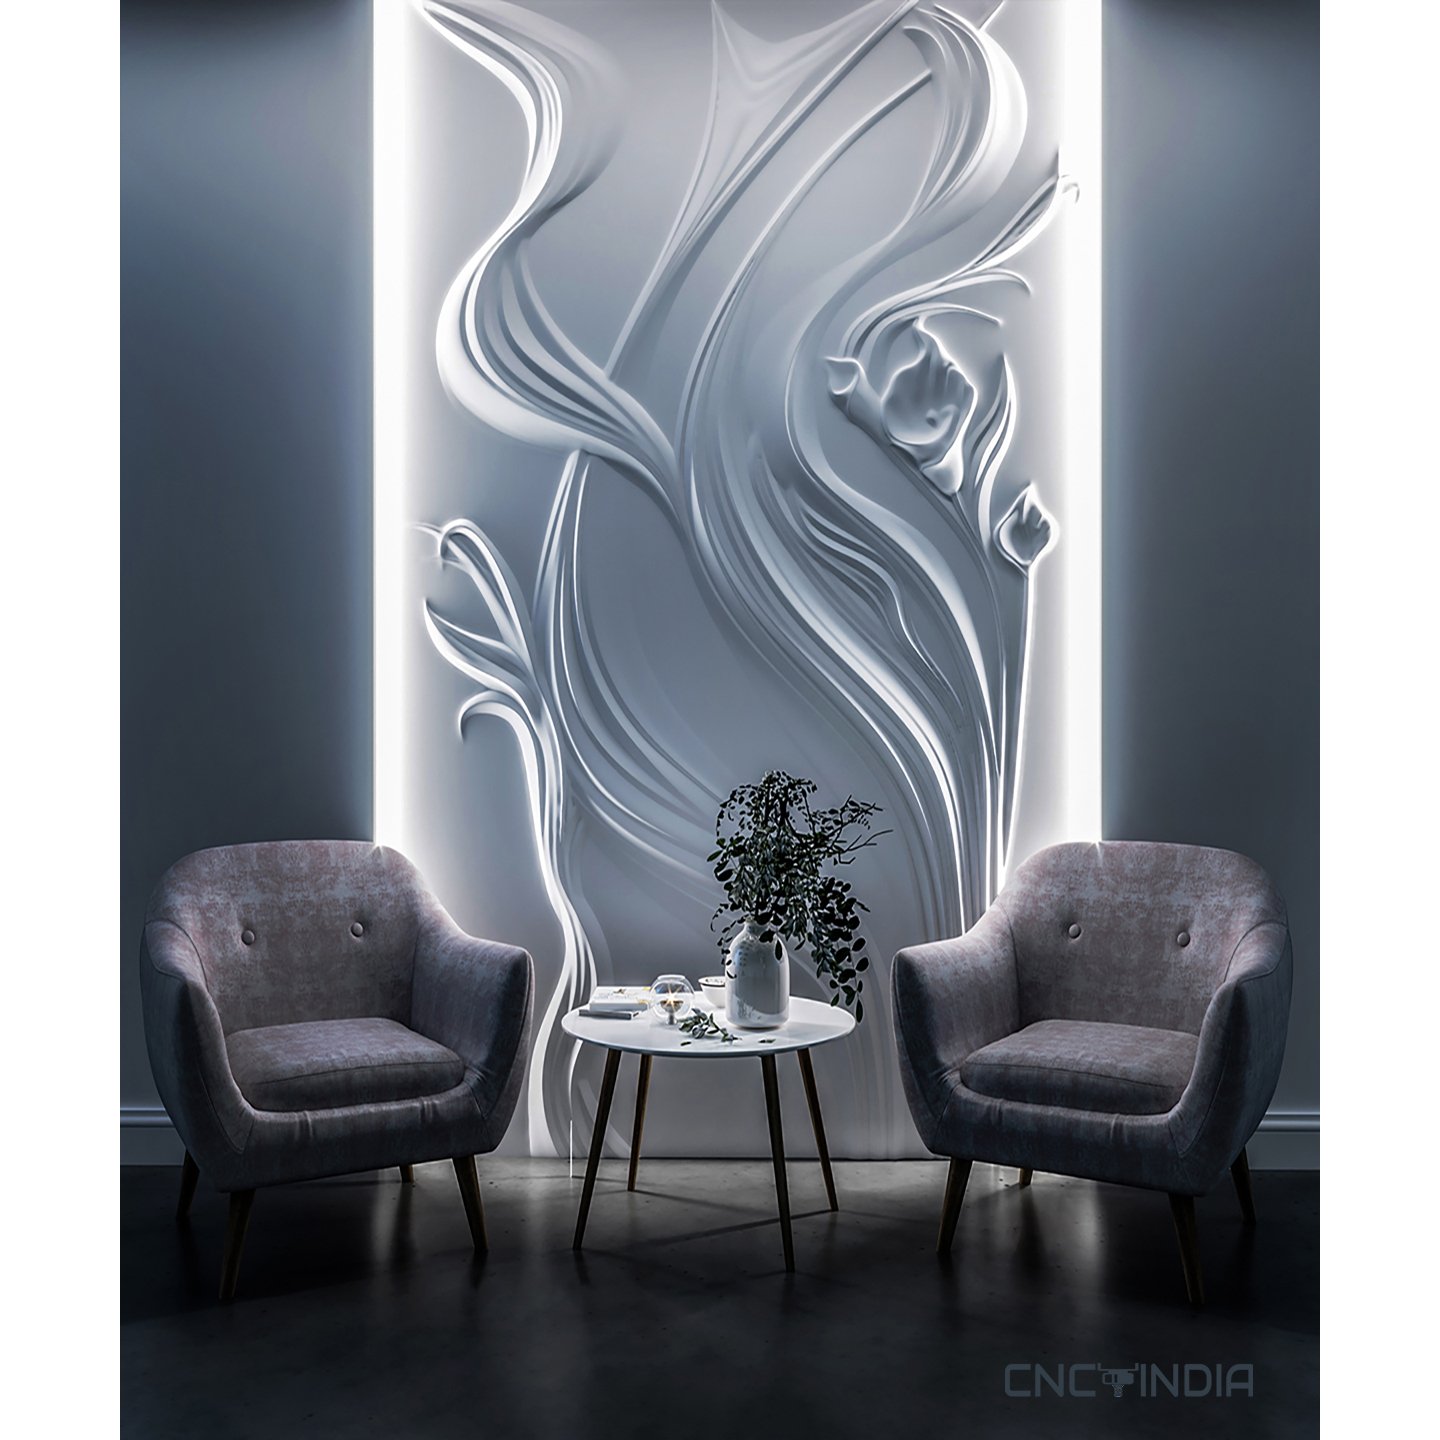 6 Examples of 3D Wall Decor - Eclectic Trends